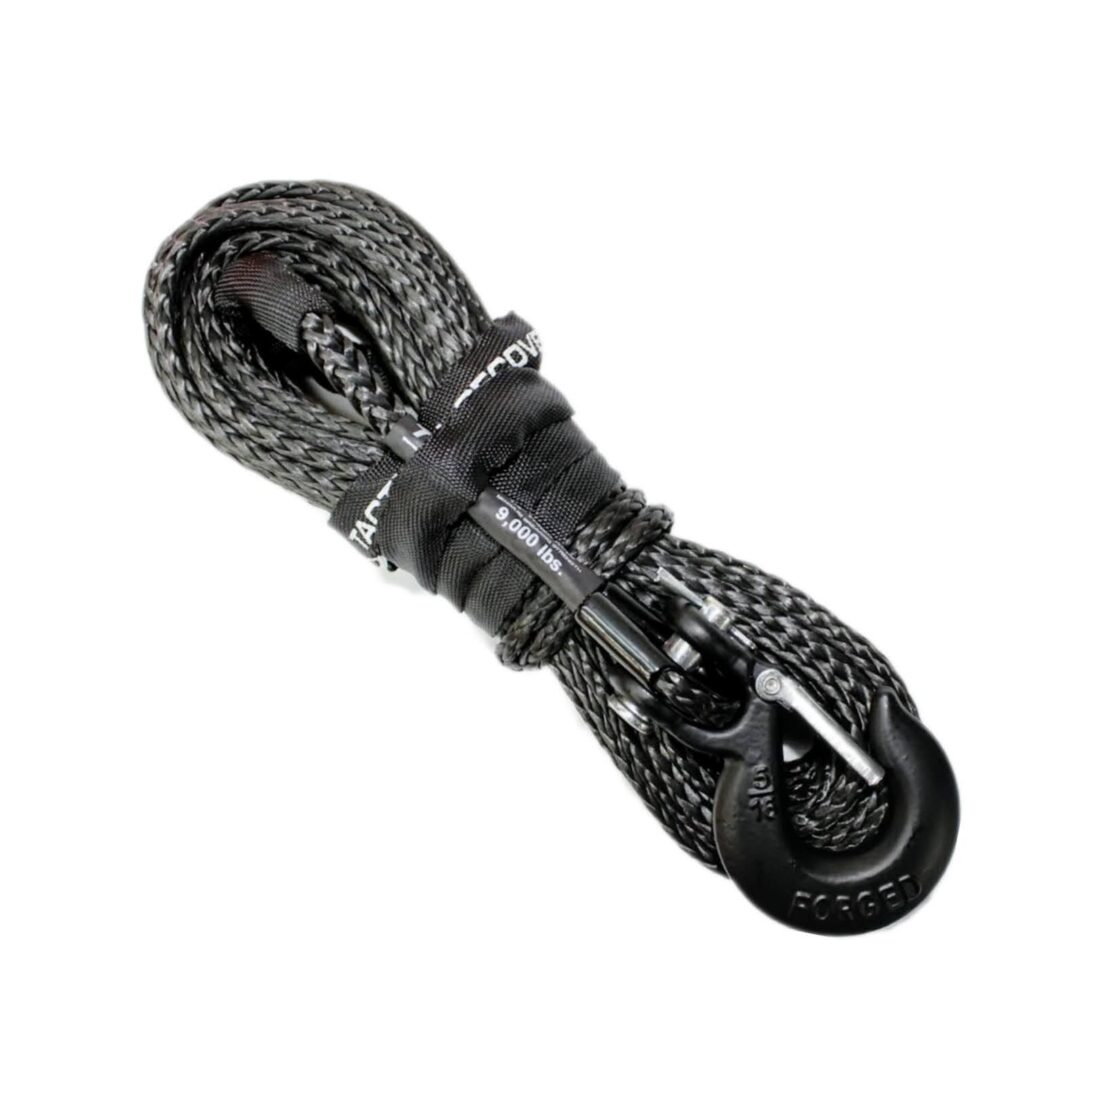 1/4 winch rope with black hook